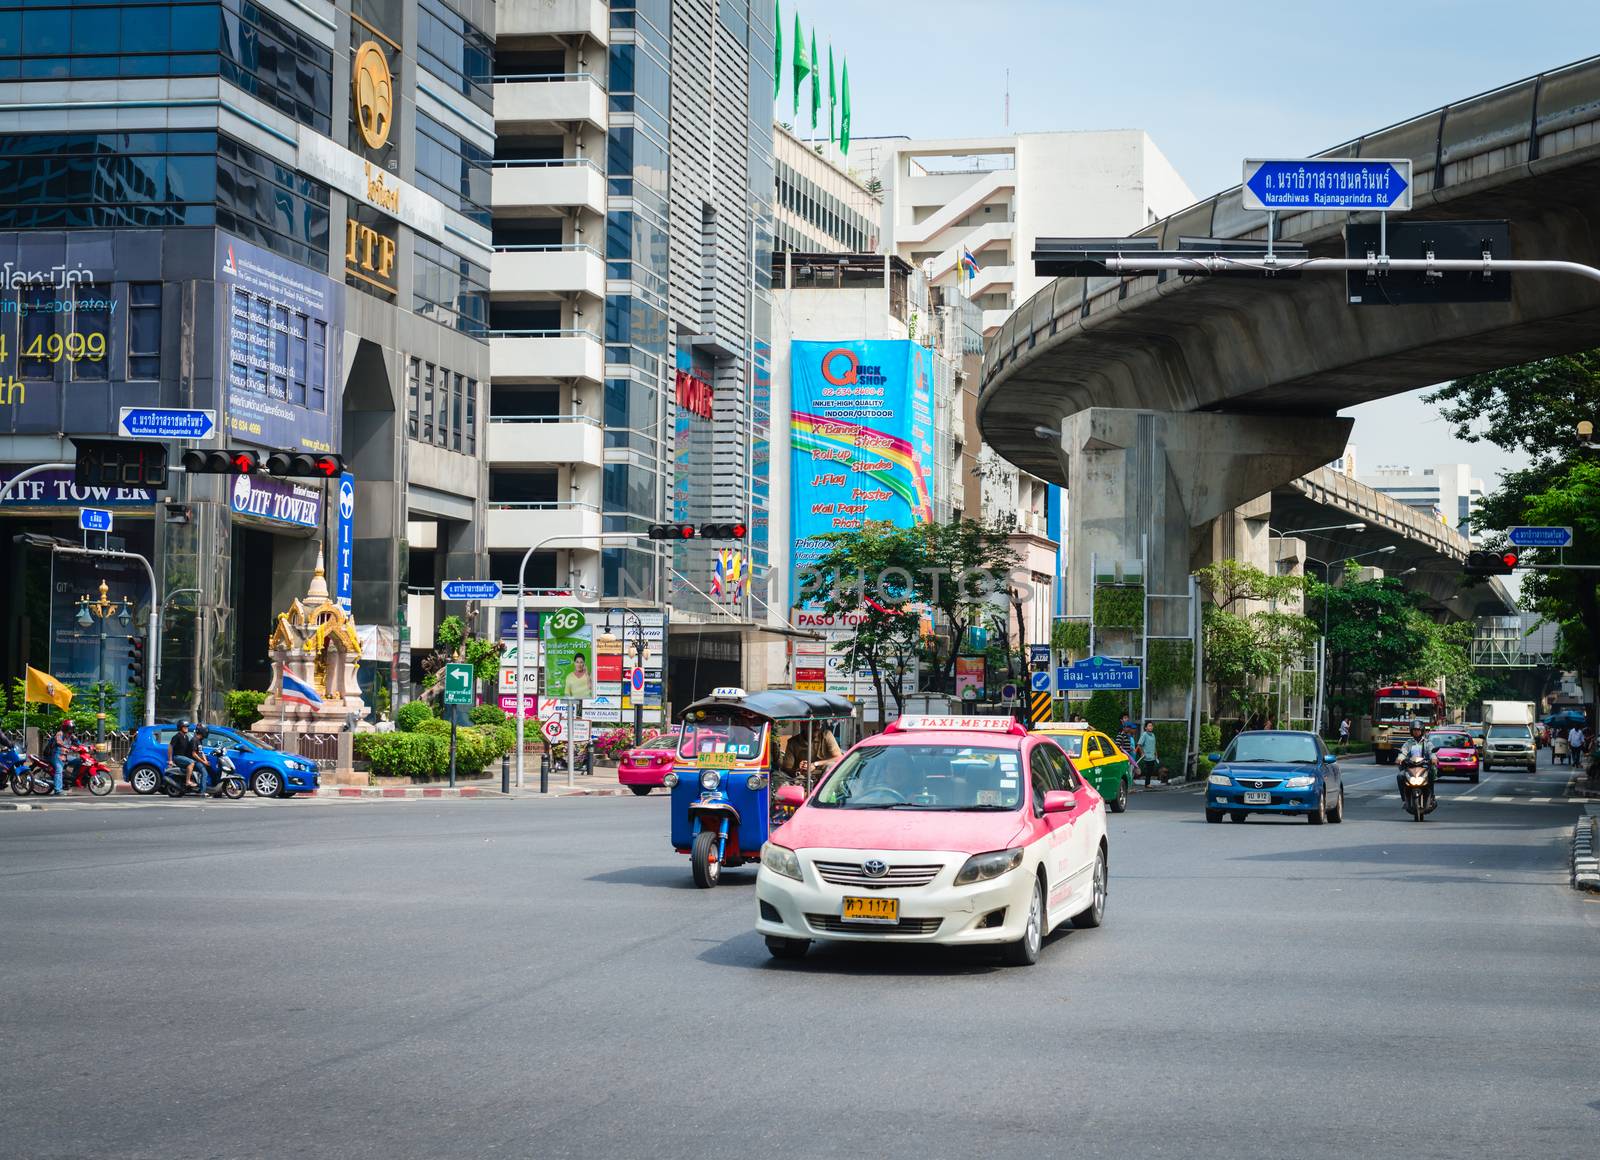 BANGKOK, THAILAND - 21 NOV 2013: Taxi and traditional tuk-tuk pass on crossroads street with skytrain track on background